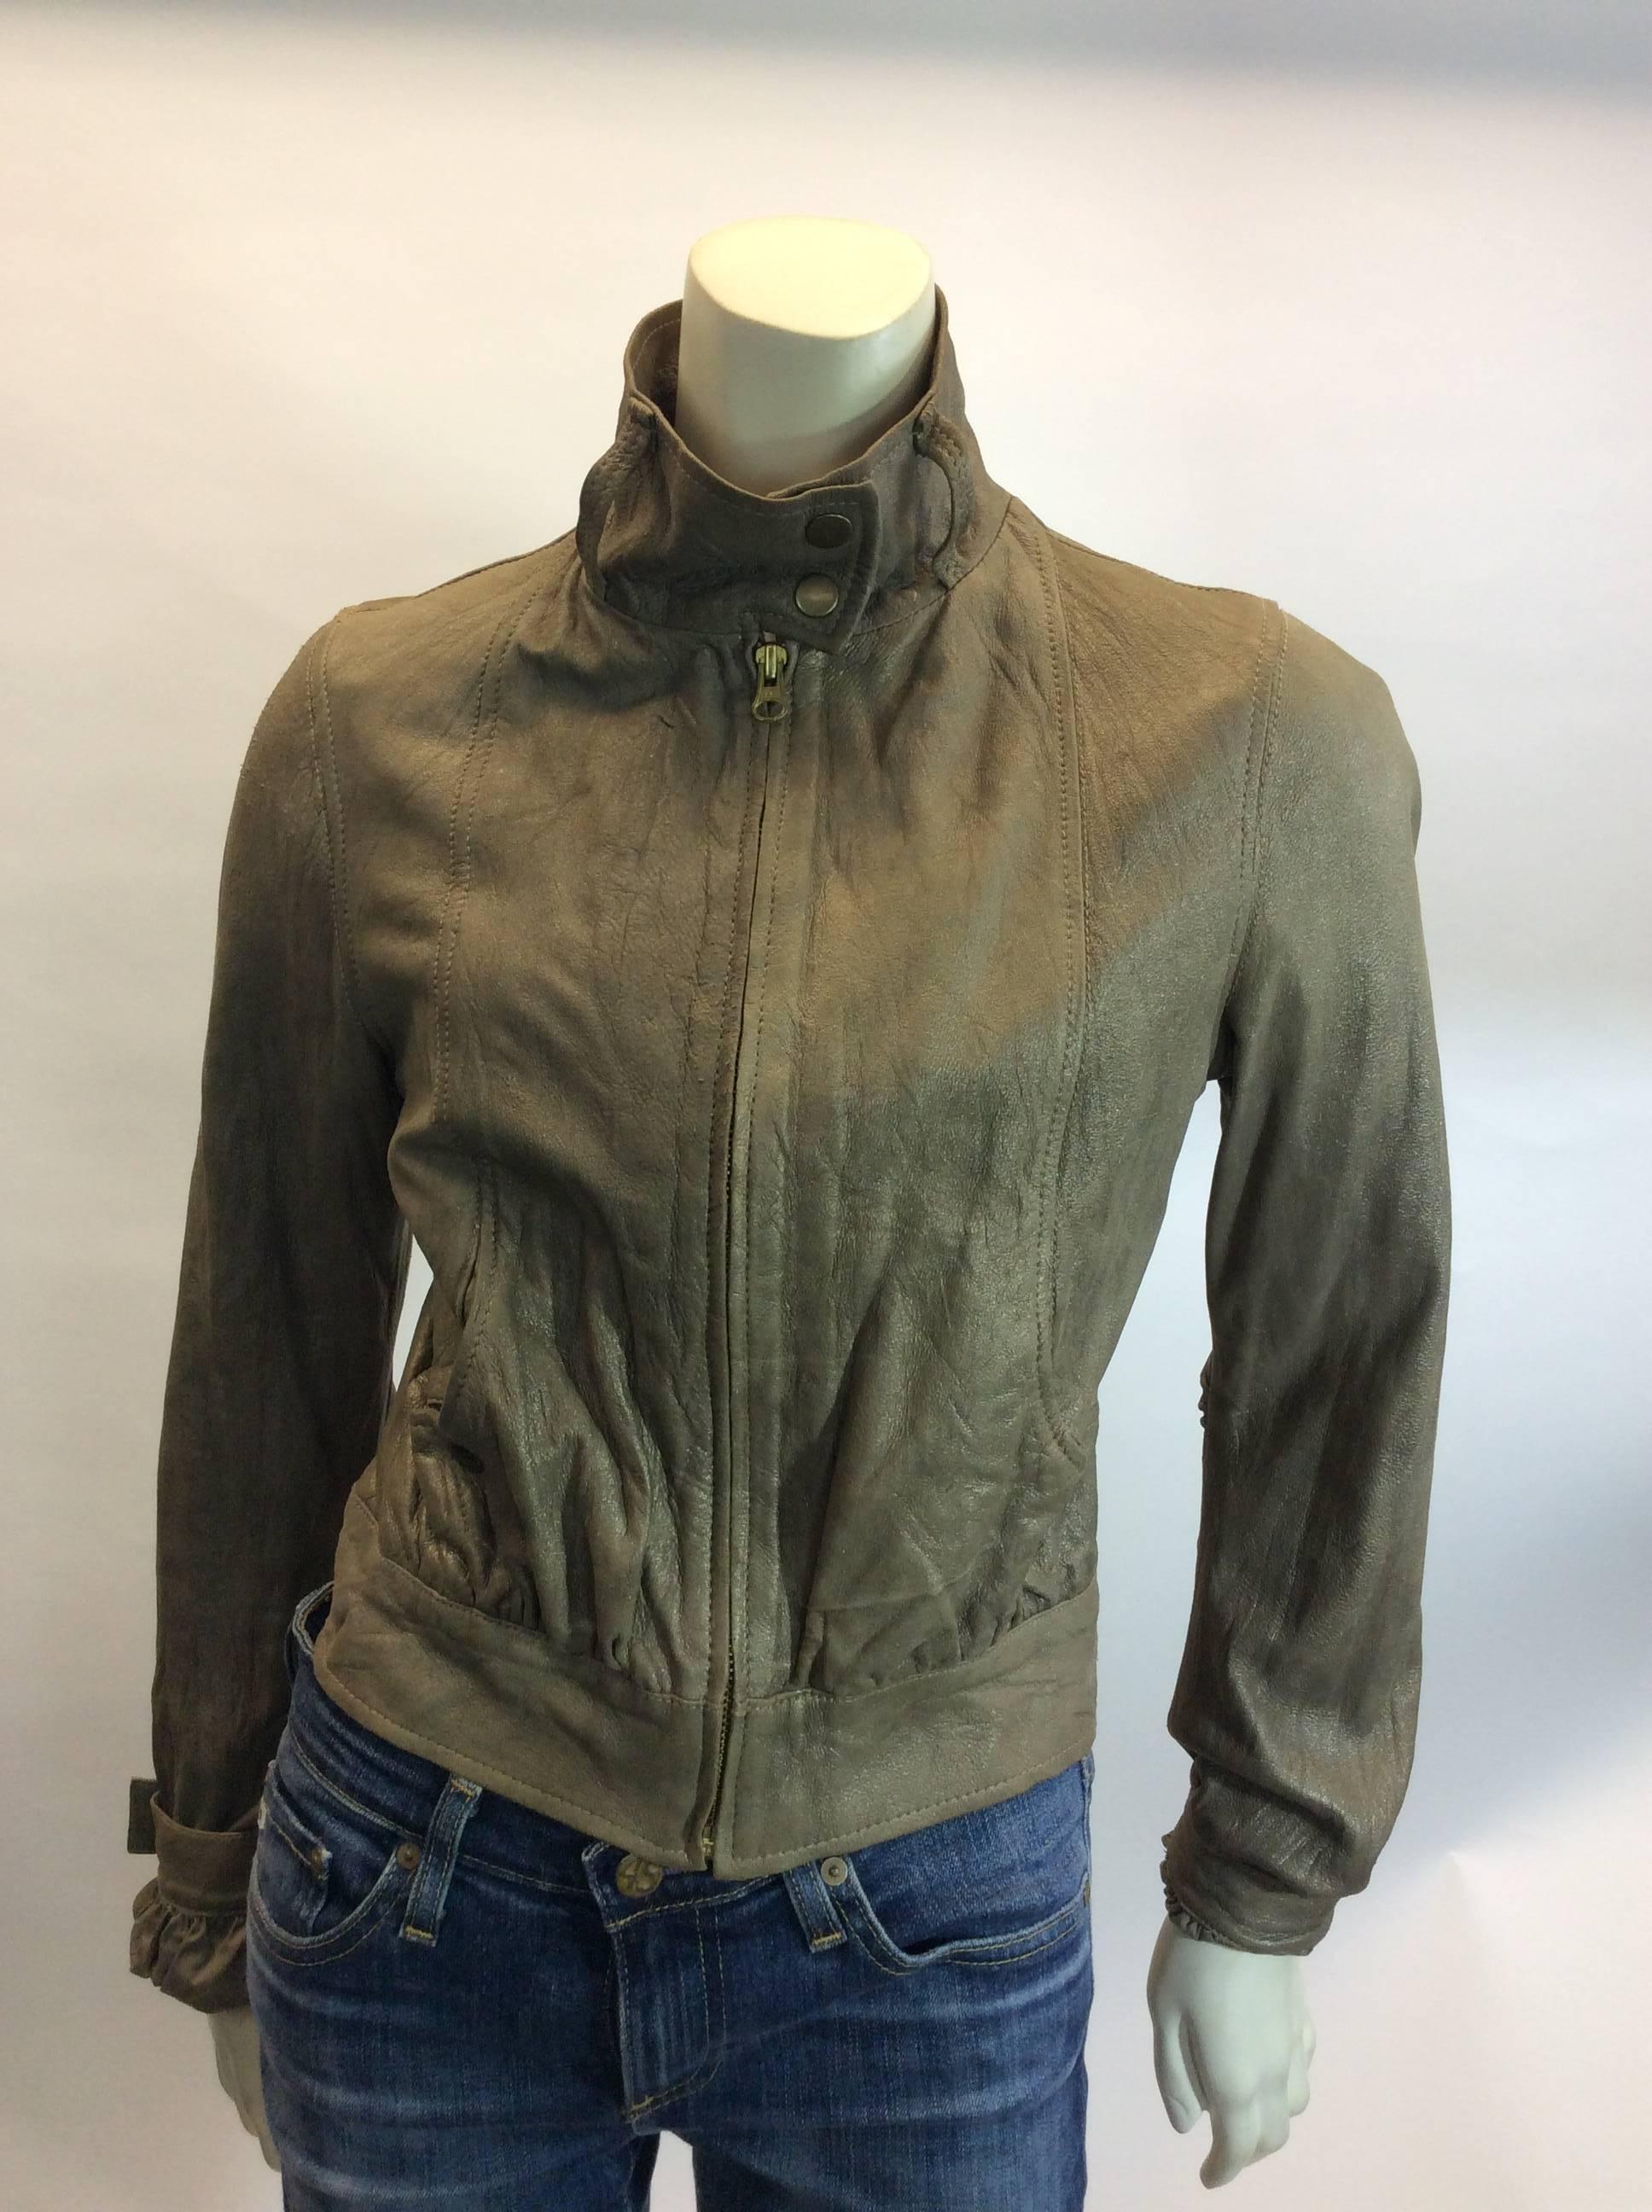 Mike & Chris Taupe Leather Jacket With Neck Scarf
Zip up jacket with YKK zipper
Two front snap pockets
Neck scarf included
Lined 100% cotton
$299
Made in the USA